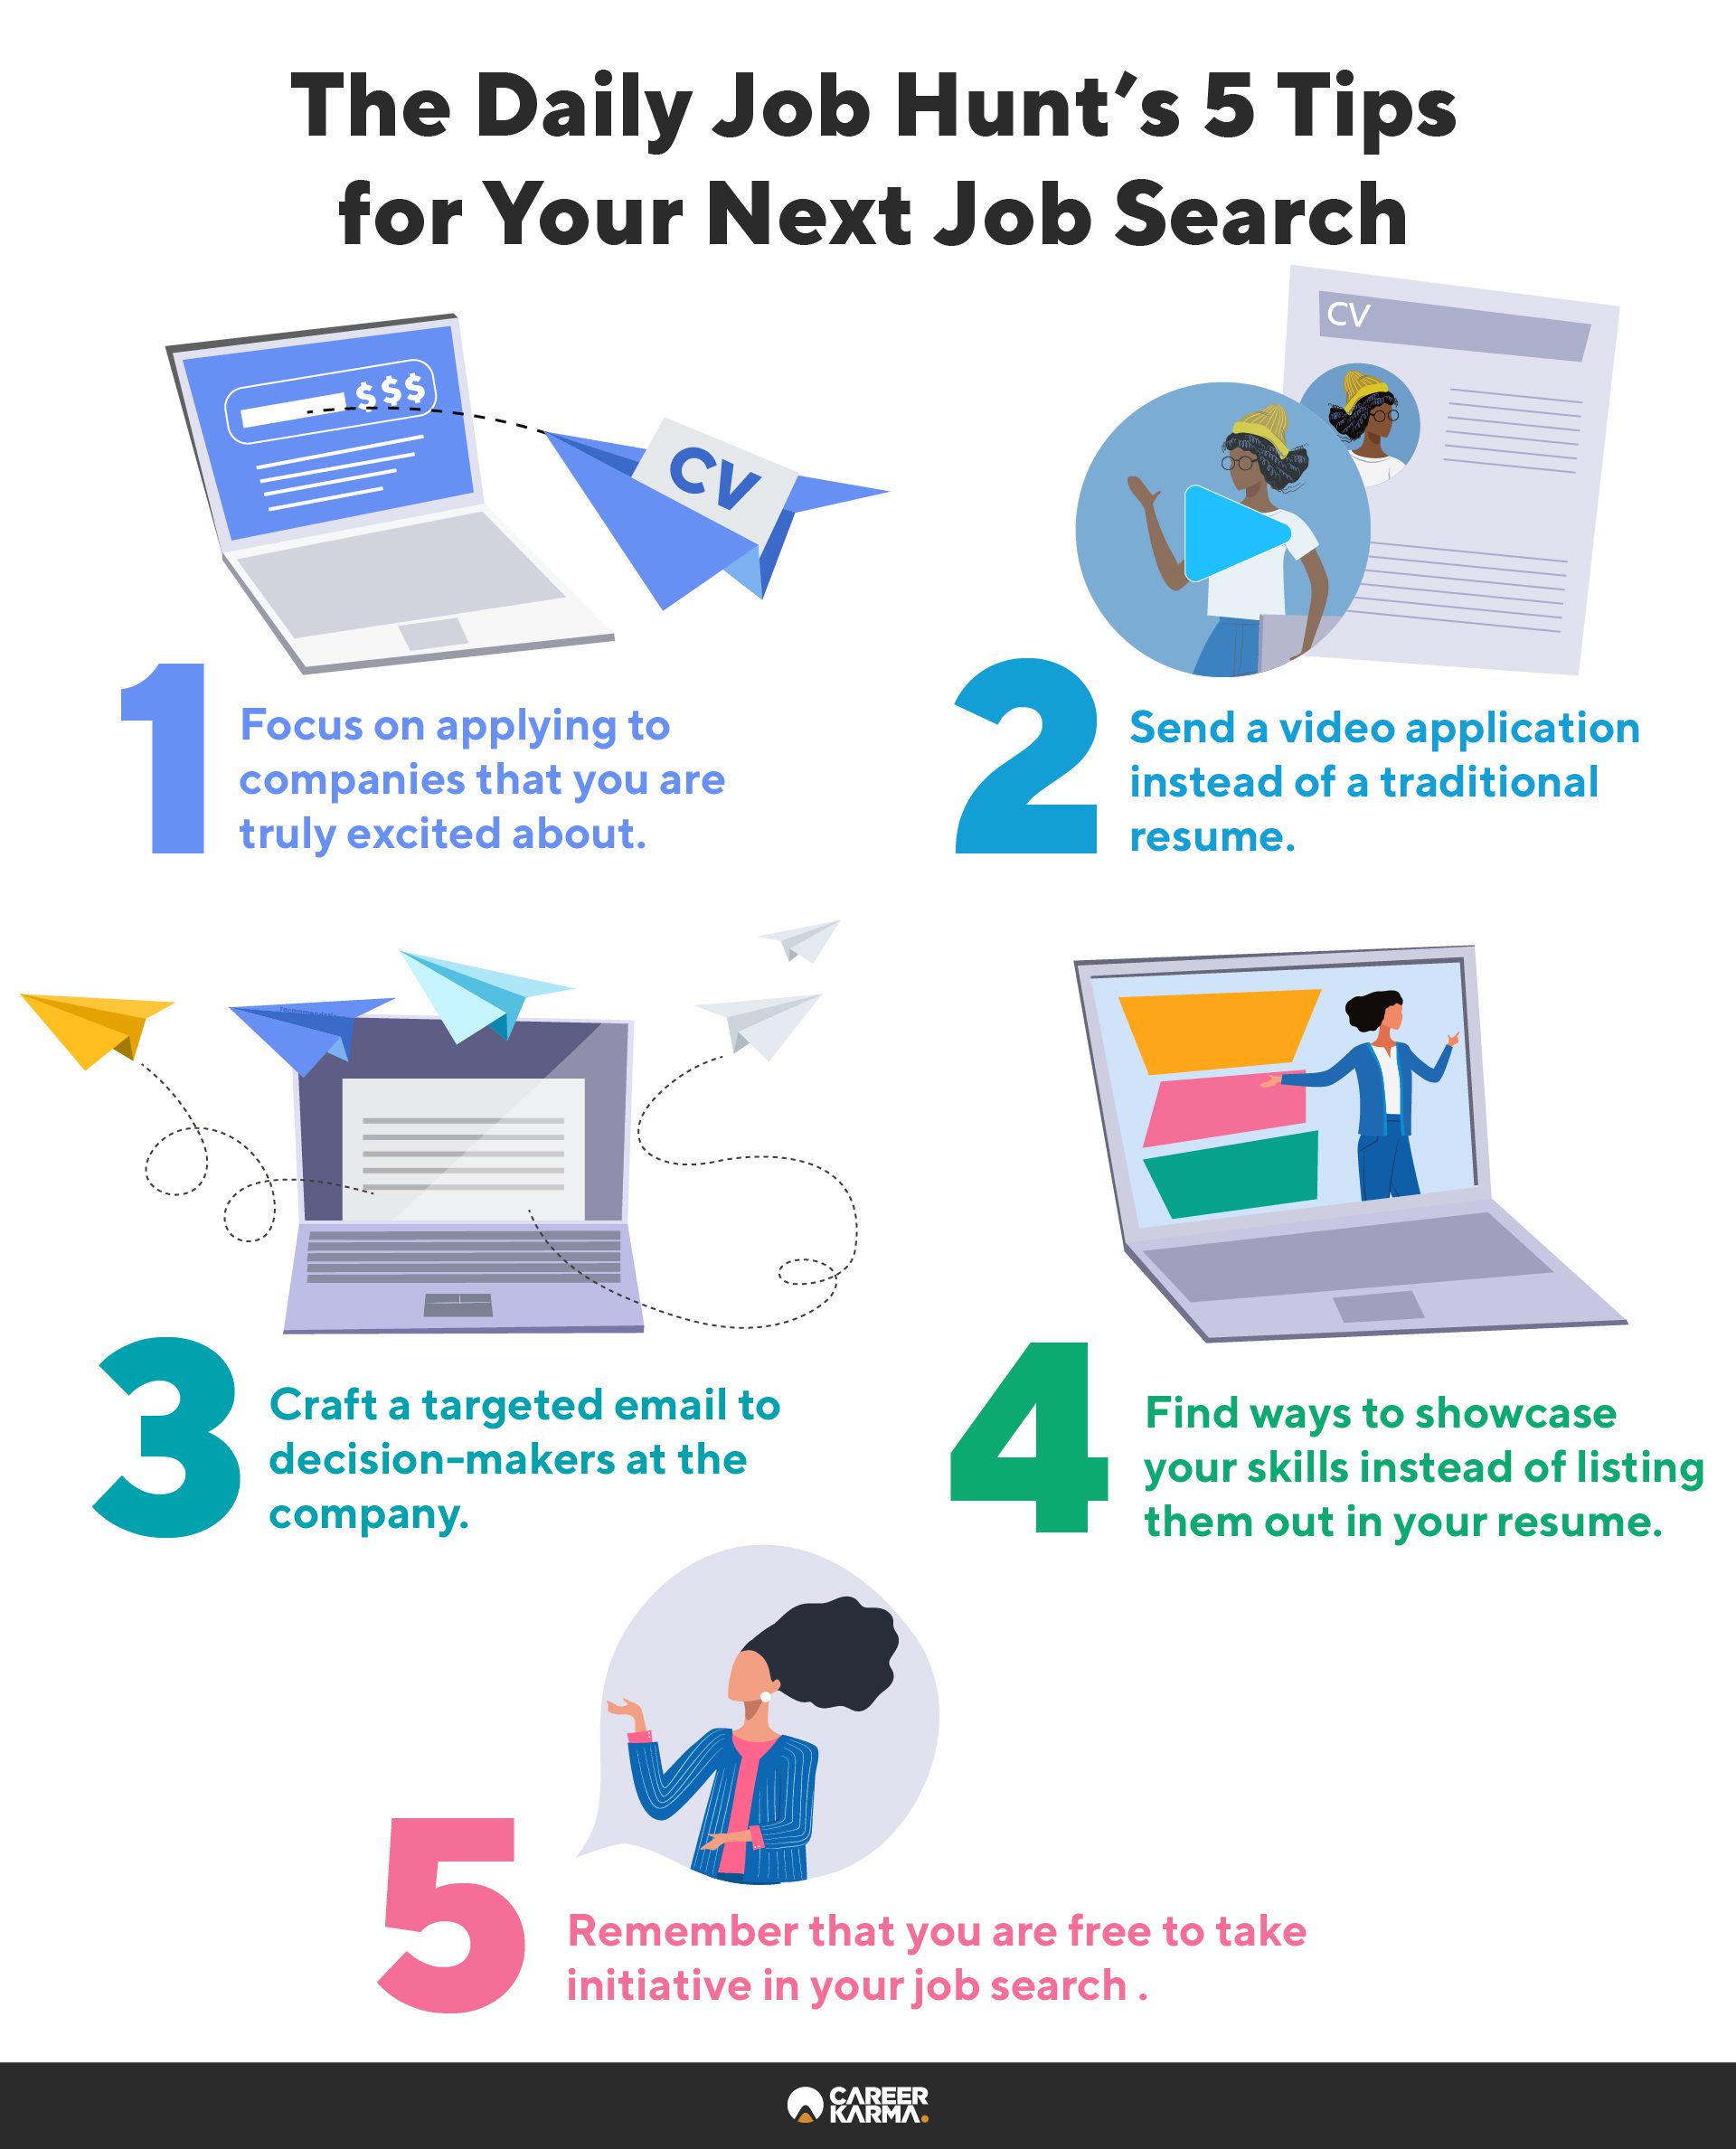 An infographic featuring five ways to optimize your job search experience according to The Daily Job Hunt.